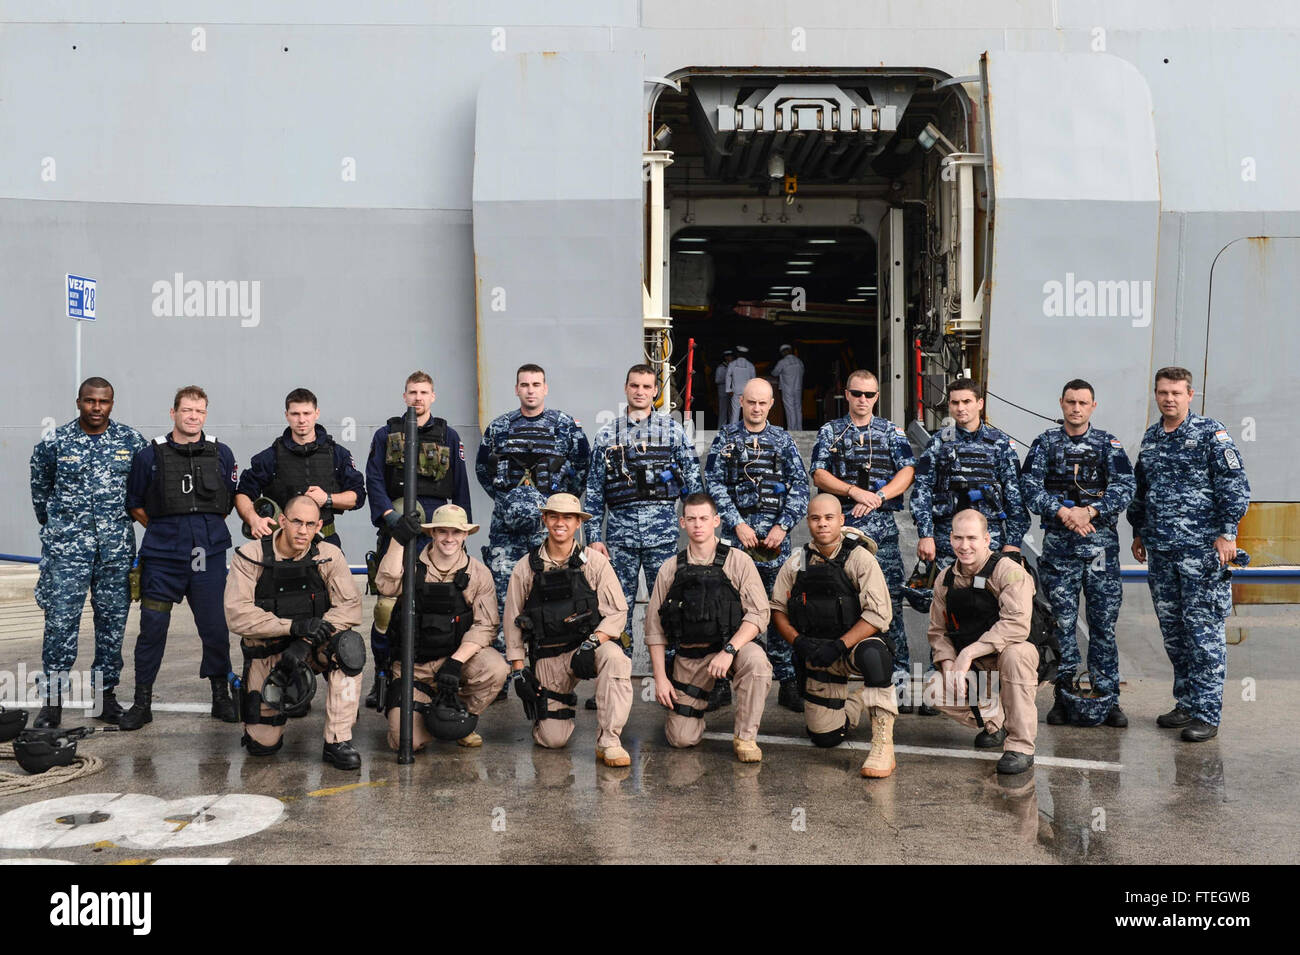 SPLIT, Croatia (Oct. 7, 2014) Sailors and members of the Croatian and Slovenian navies pose for a group photo in front of the amphibious transport dock ship USS Mesa Verde (LPD 19) while participating in a joint visit, board, search and seizure (VBSS) training during a scheduled port visit. Mesa Verde, part of the Bataan Amphibious Ready Group with the embarked 22nd Marine Expeditionary Unit, is conducting naval operations in the U.S. 6th Fleet area of operations in support of U.S. national security interests in Europe. Stock Photo